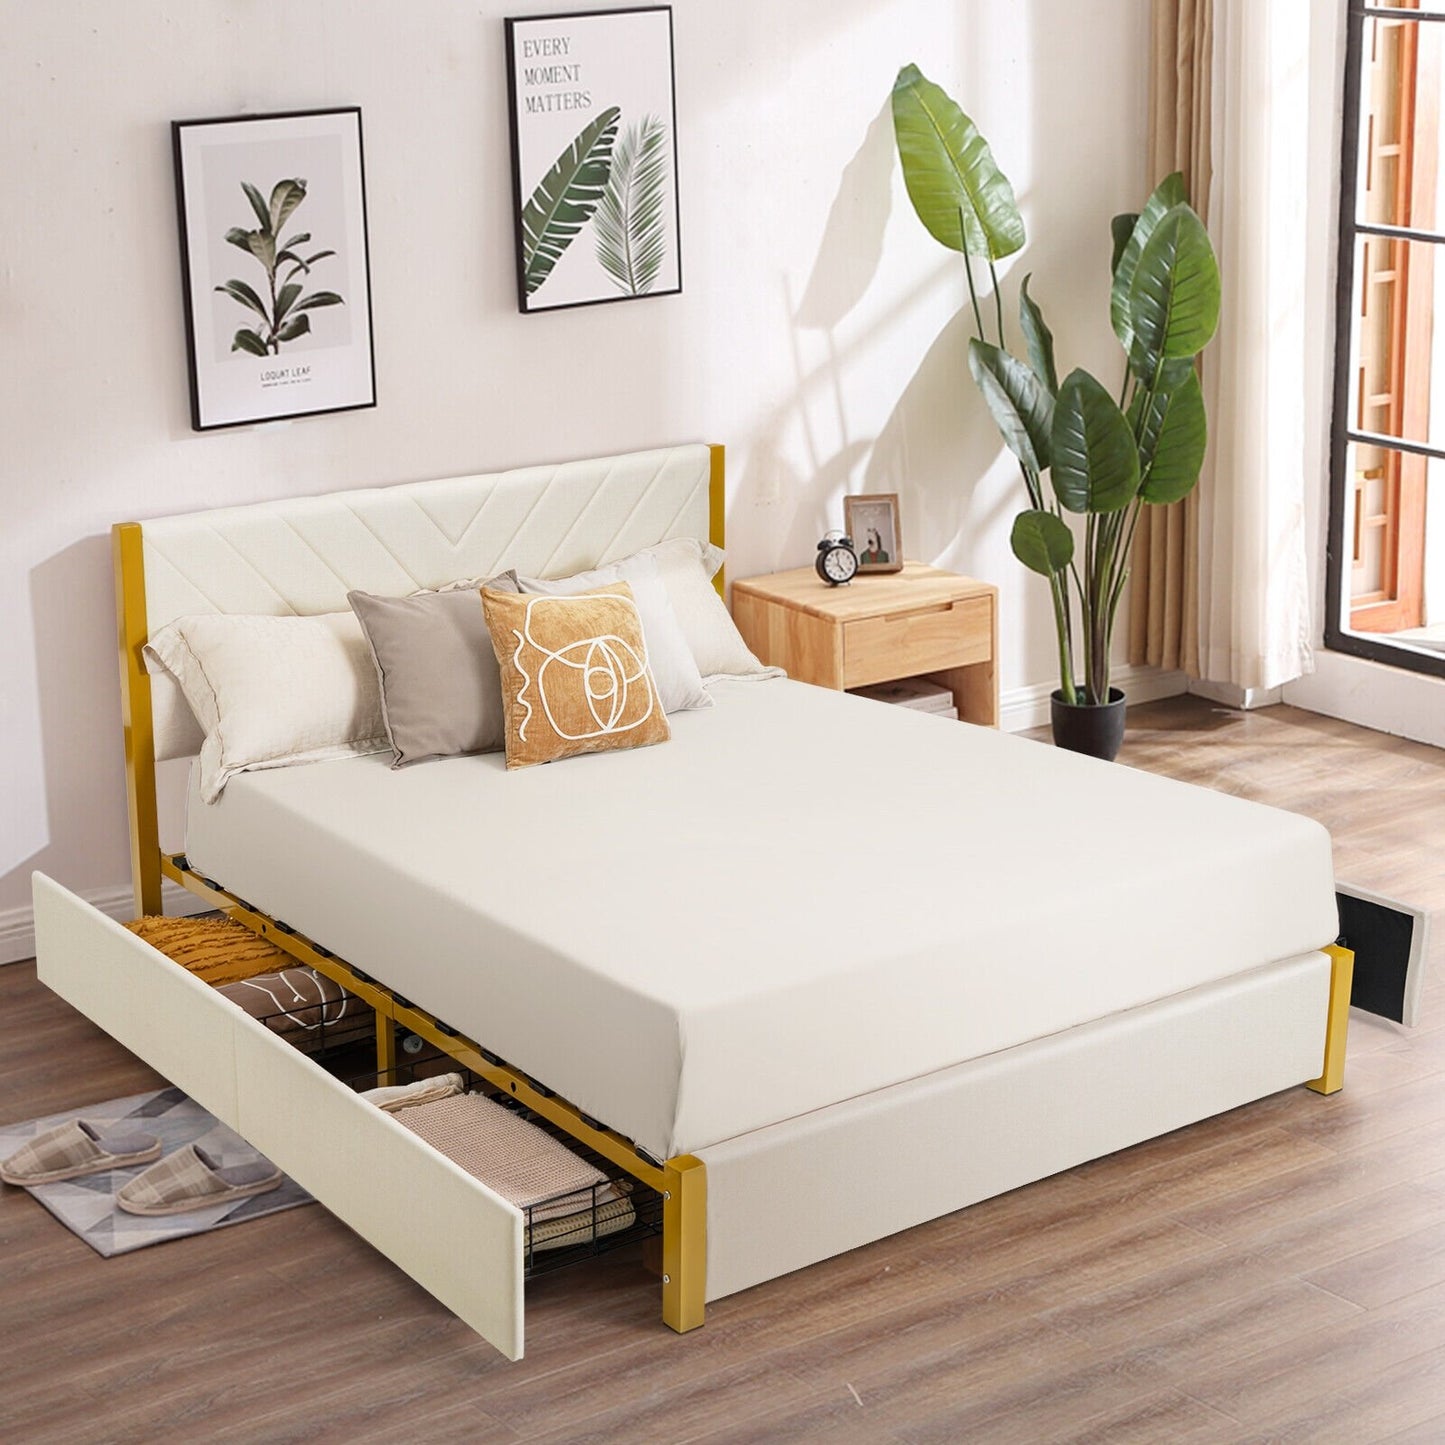 Full Size/Queen Size Upholstered Bed Frame with Adjustable Headboard and 4 Drawers-Full Size, Beige